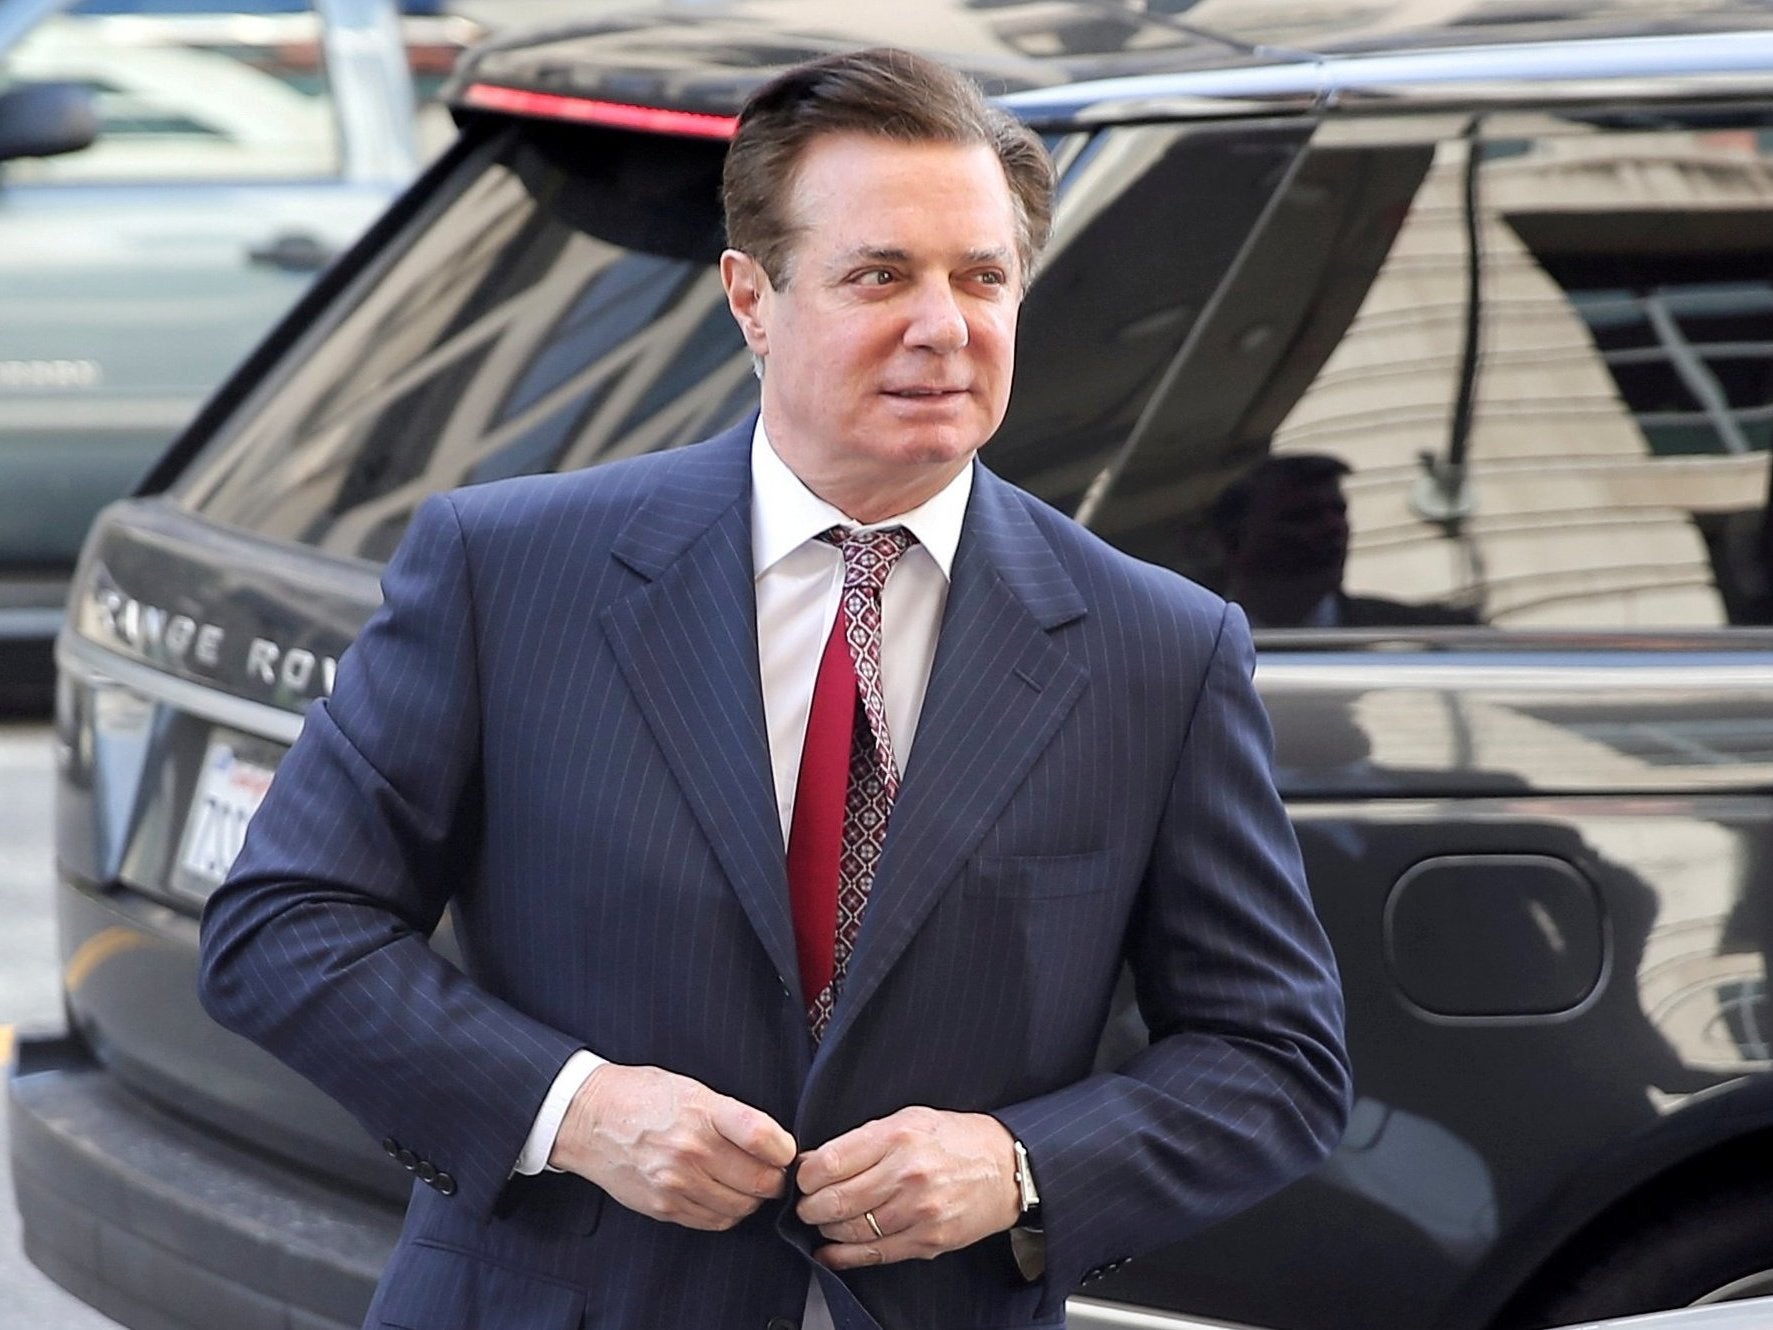 Paul Manafort trial: Expected star witness Rick Gates &apos;may not&apos; testify during ex-Trump aide&apos;s court case